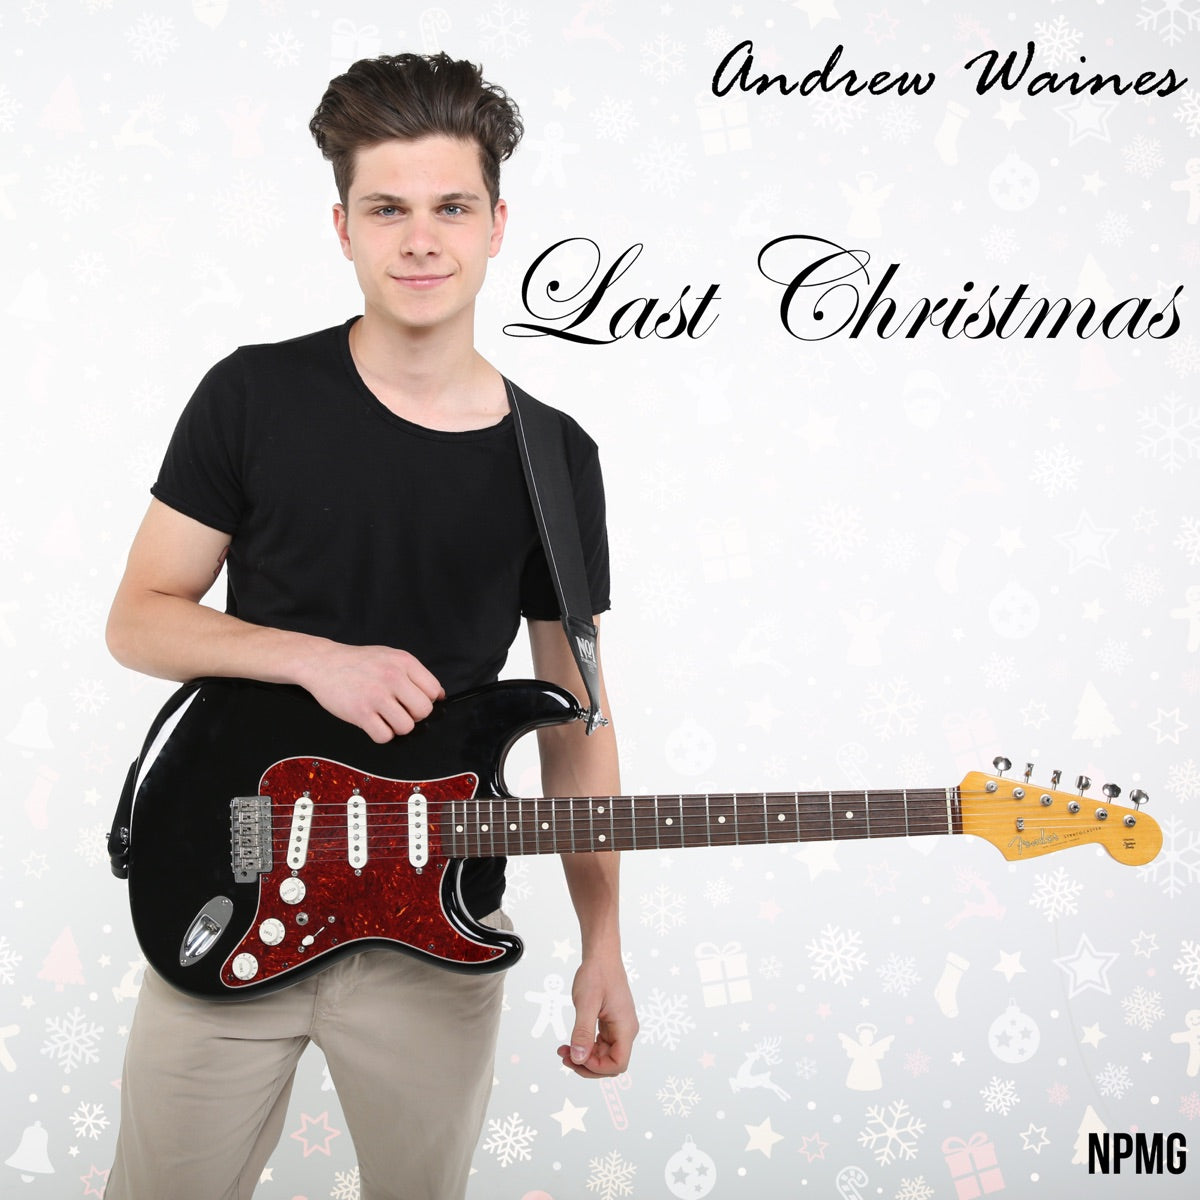 Andrew Waines - 'Last Christmas' [Ringtone for Android]